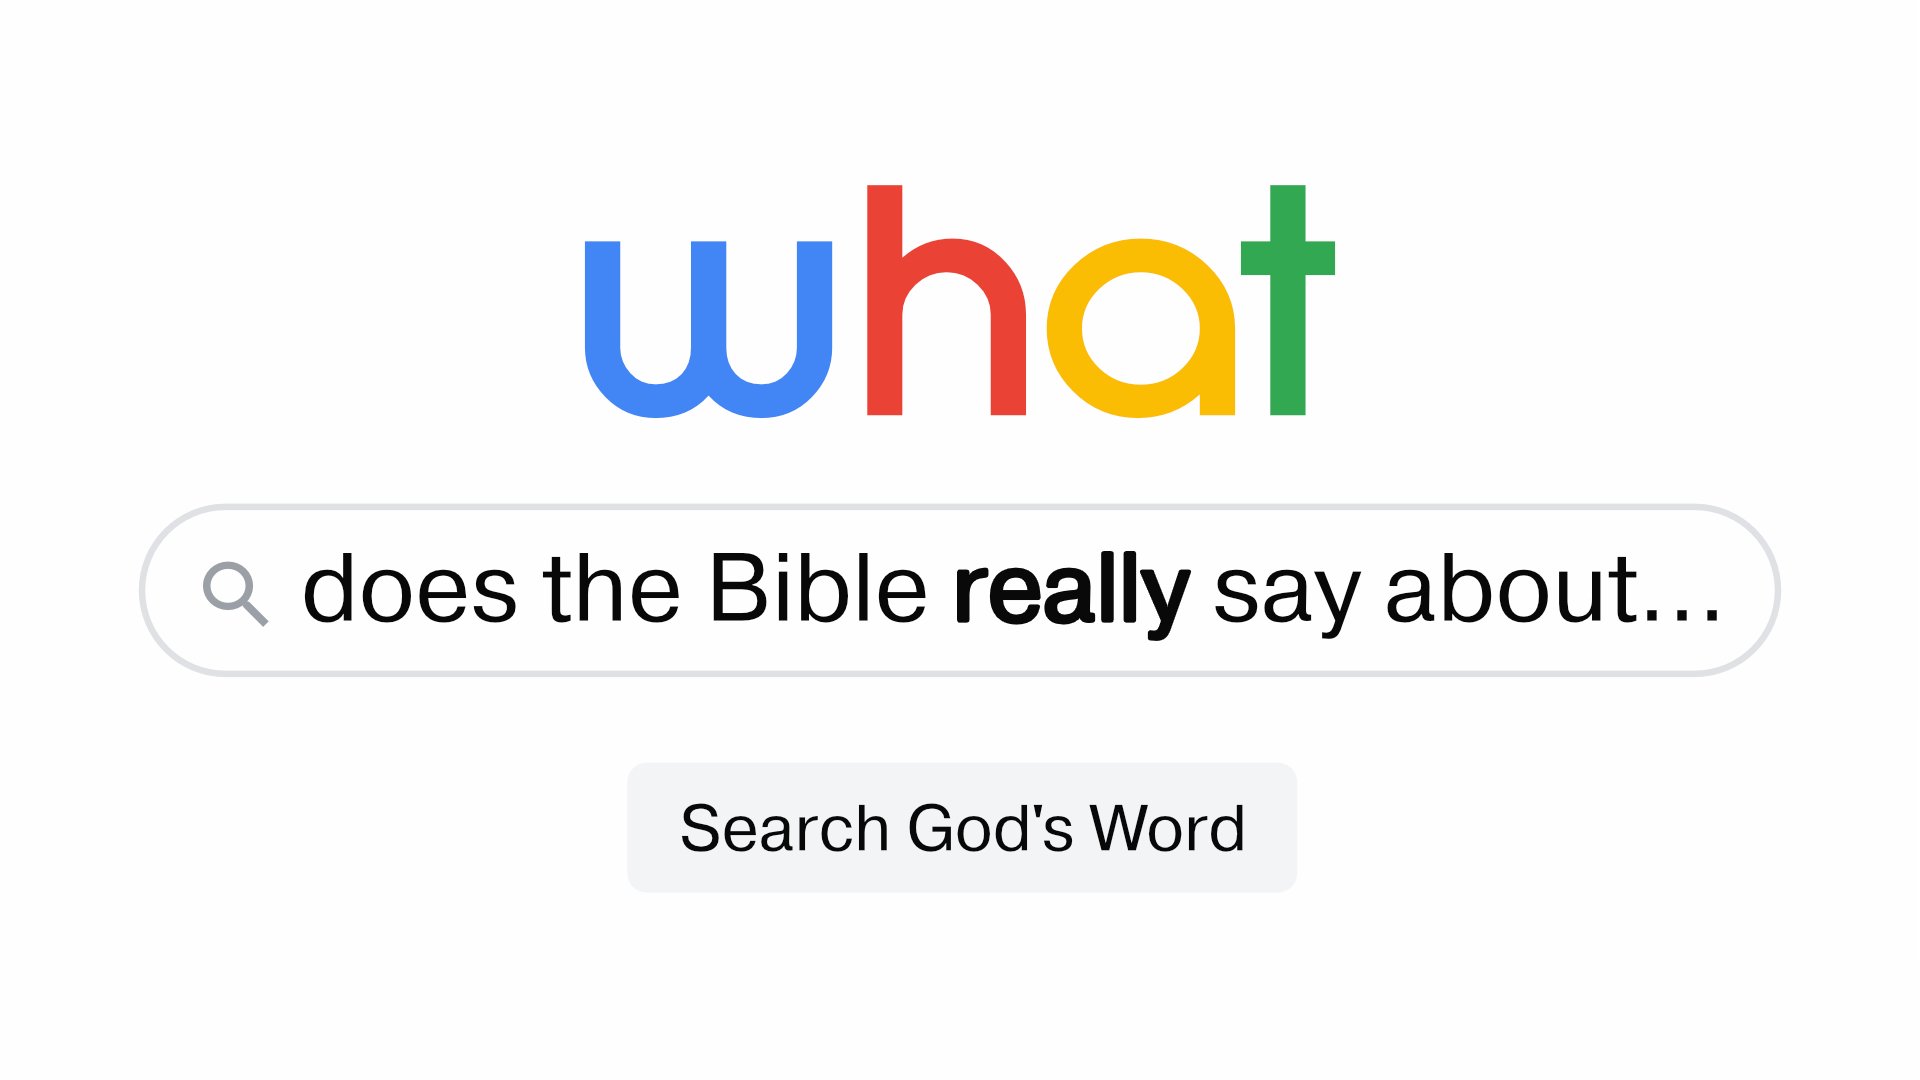 What Does The Bible Really Say?